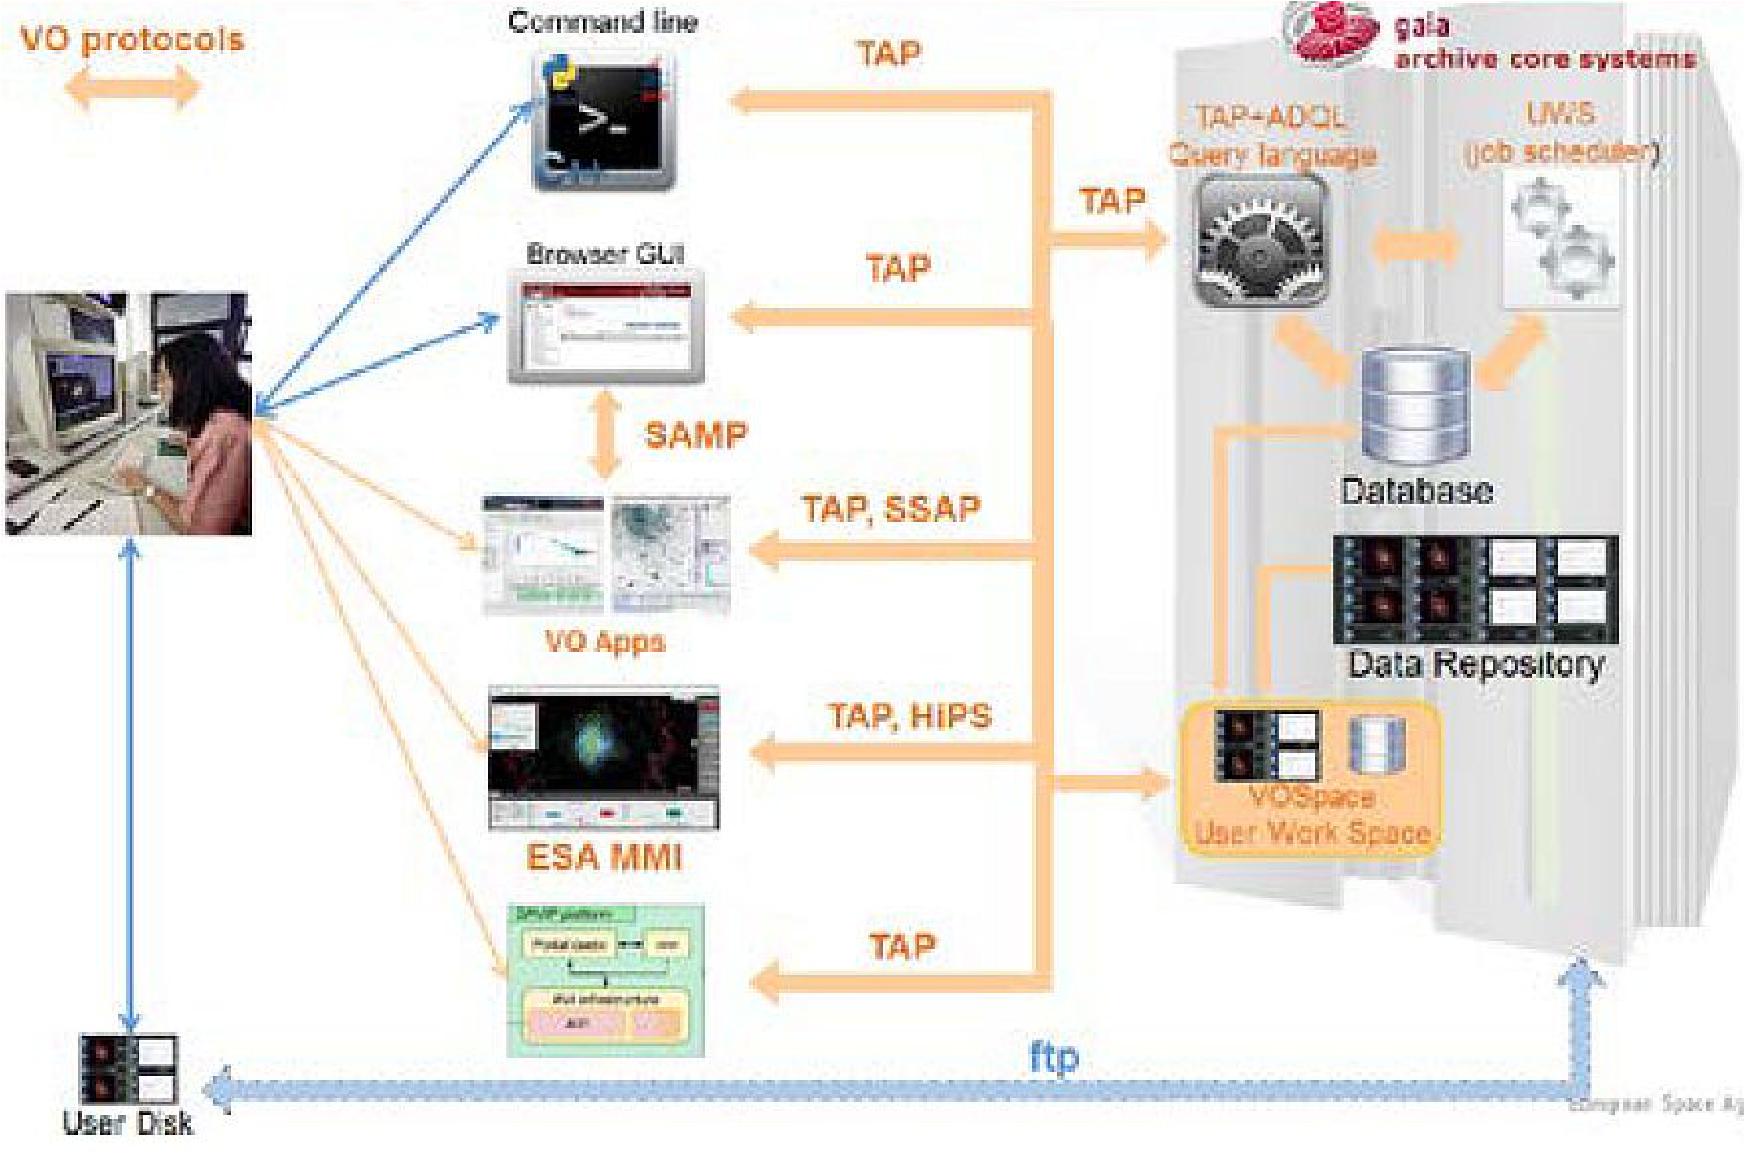 Figure 98: Gaia archive VO built-in architecture (image credit: DPAC)